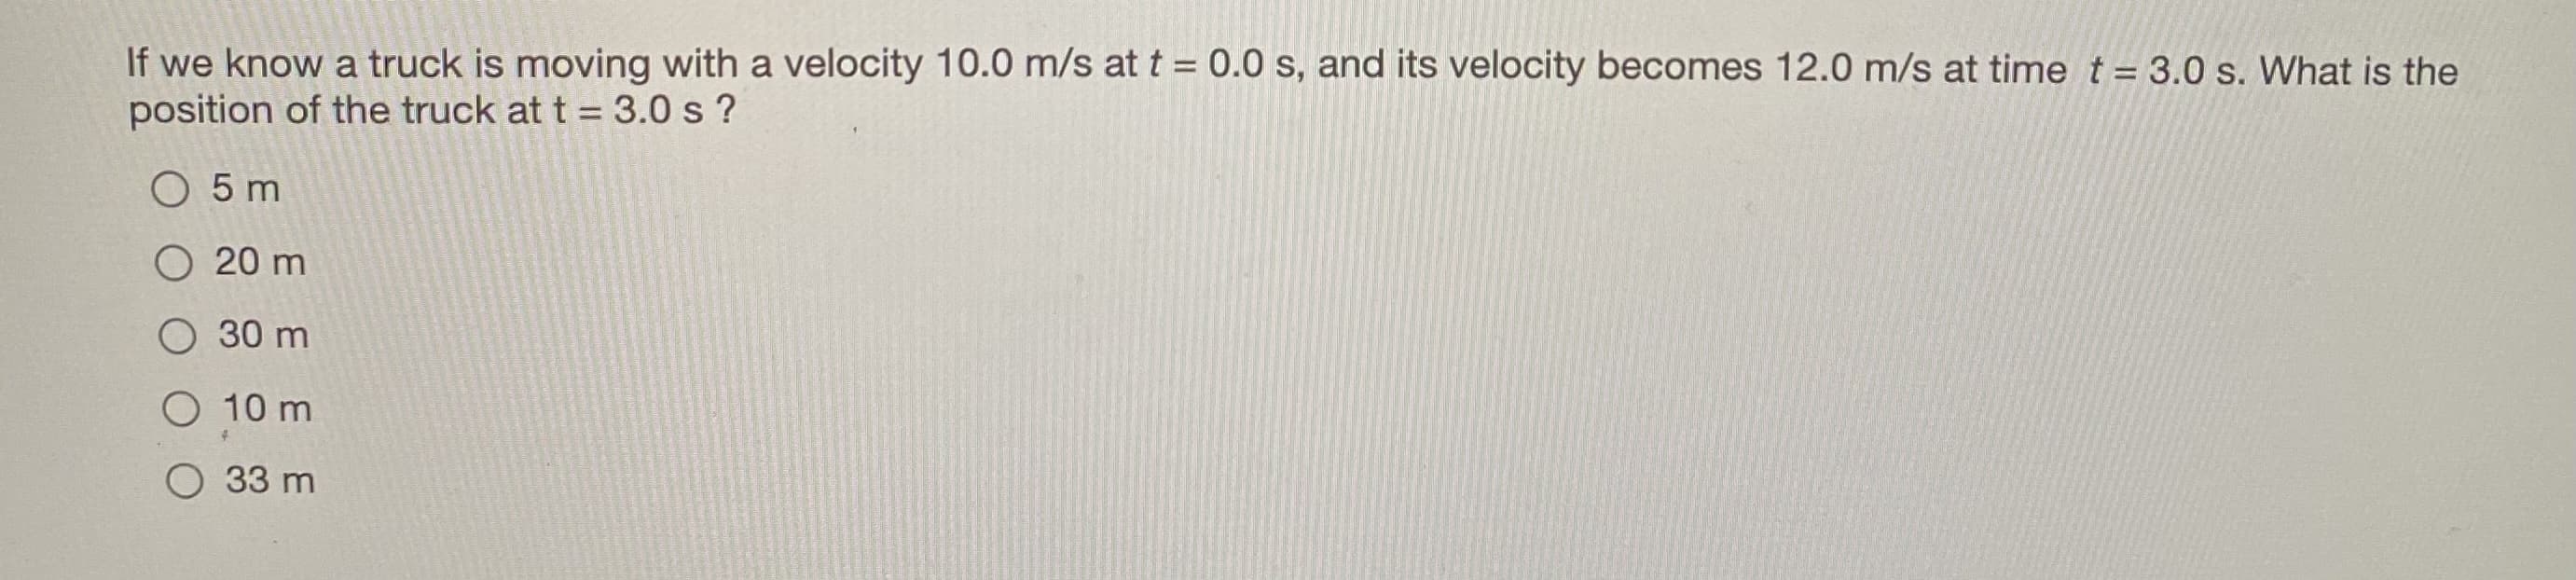 If we know a truck is moving with a velocity 10.0 m/s at t = 0.0 s, and its velocity becomes 12.0 m/s at time t = 3.0 s. What is the
position of the truck at t = 3.0 s ?
O 5 m
O 20 m
O 30 m
O 10 m
O 33 m
